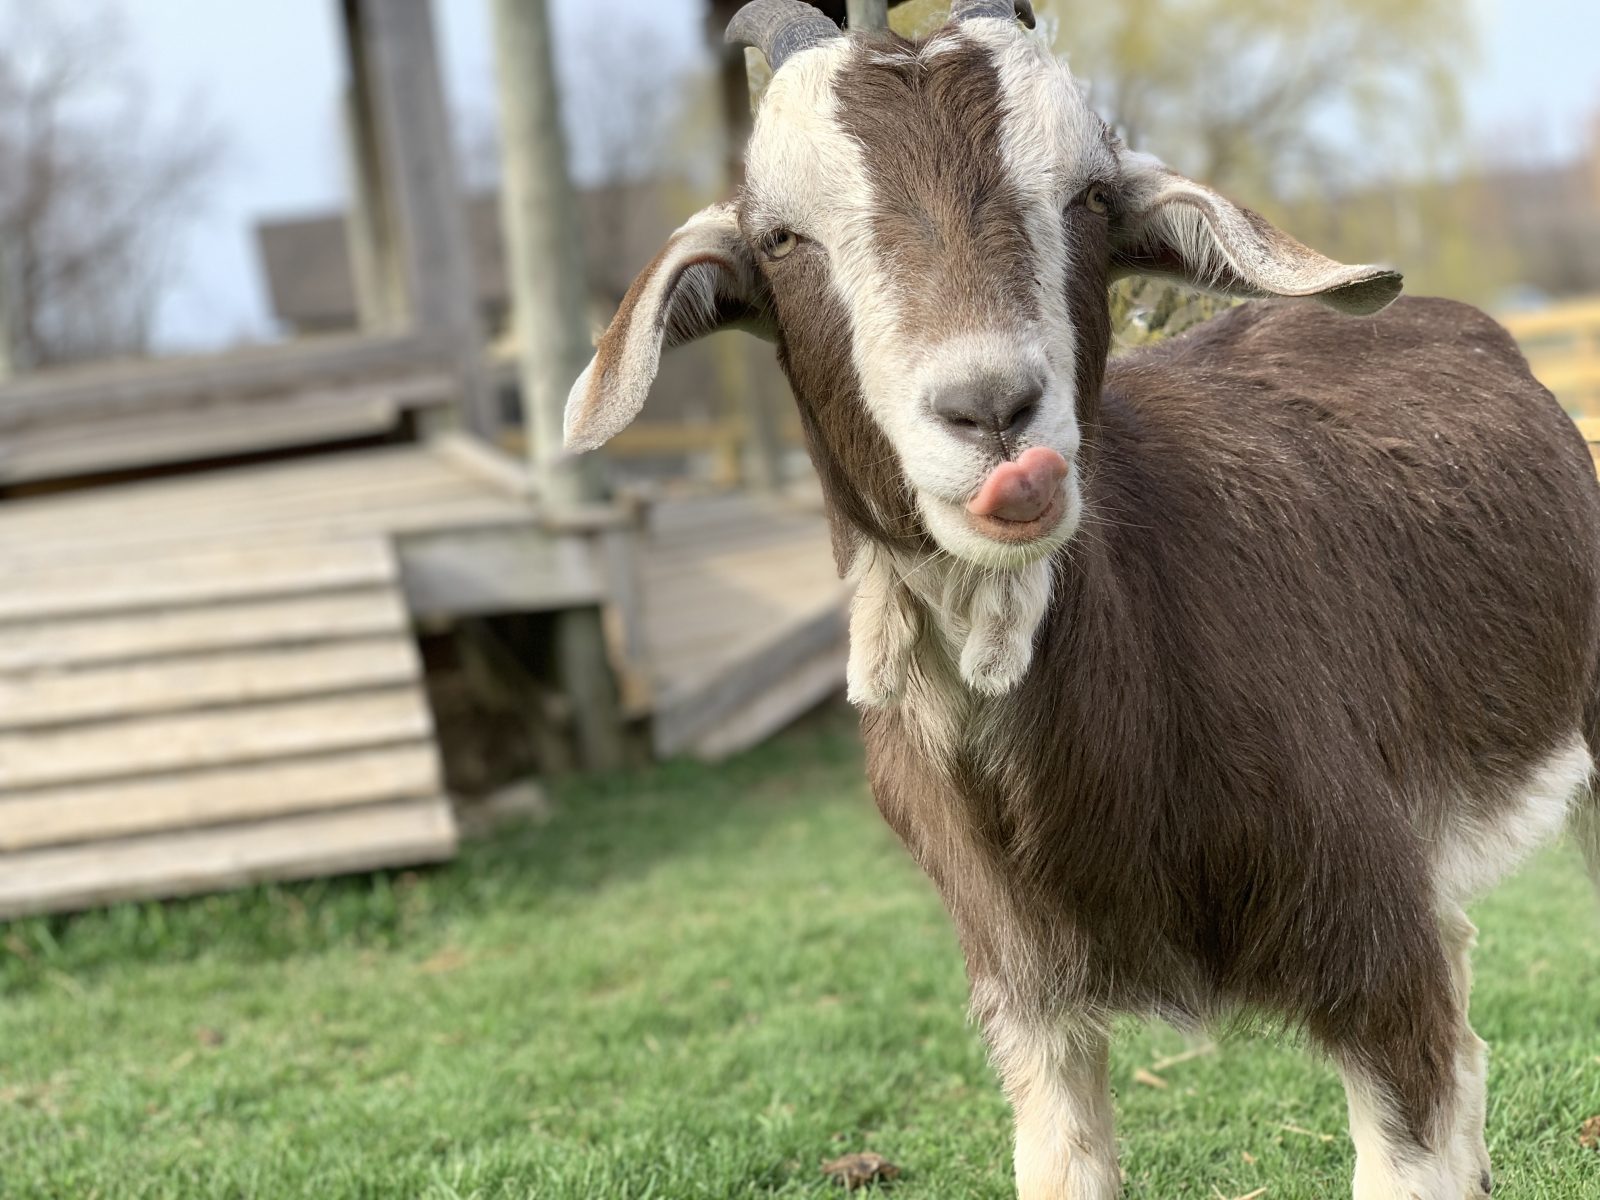 Hans sticks his tongue out while playing at Farm Sanctuary